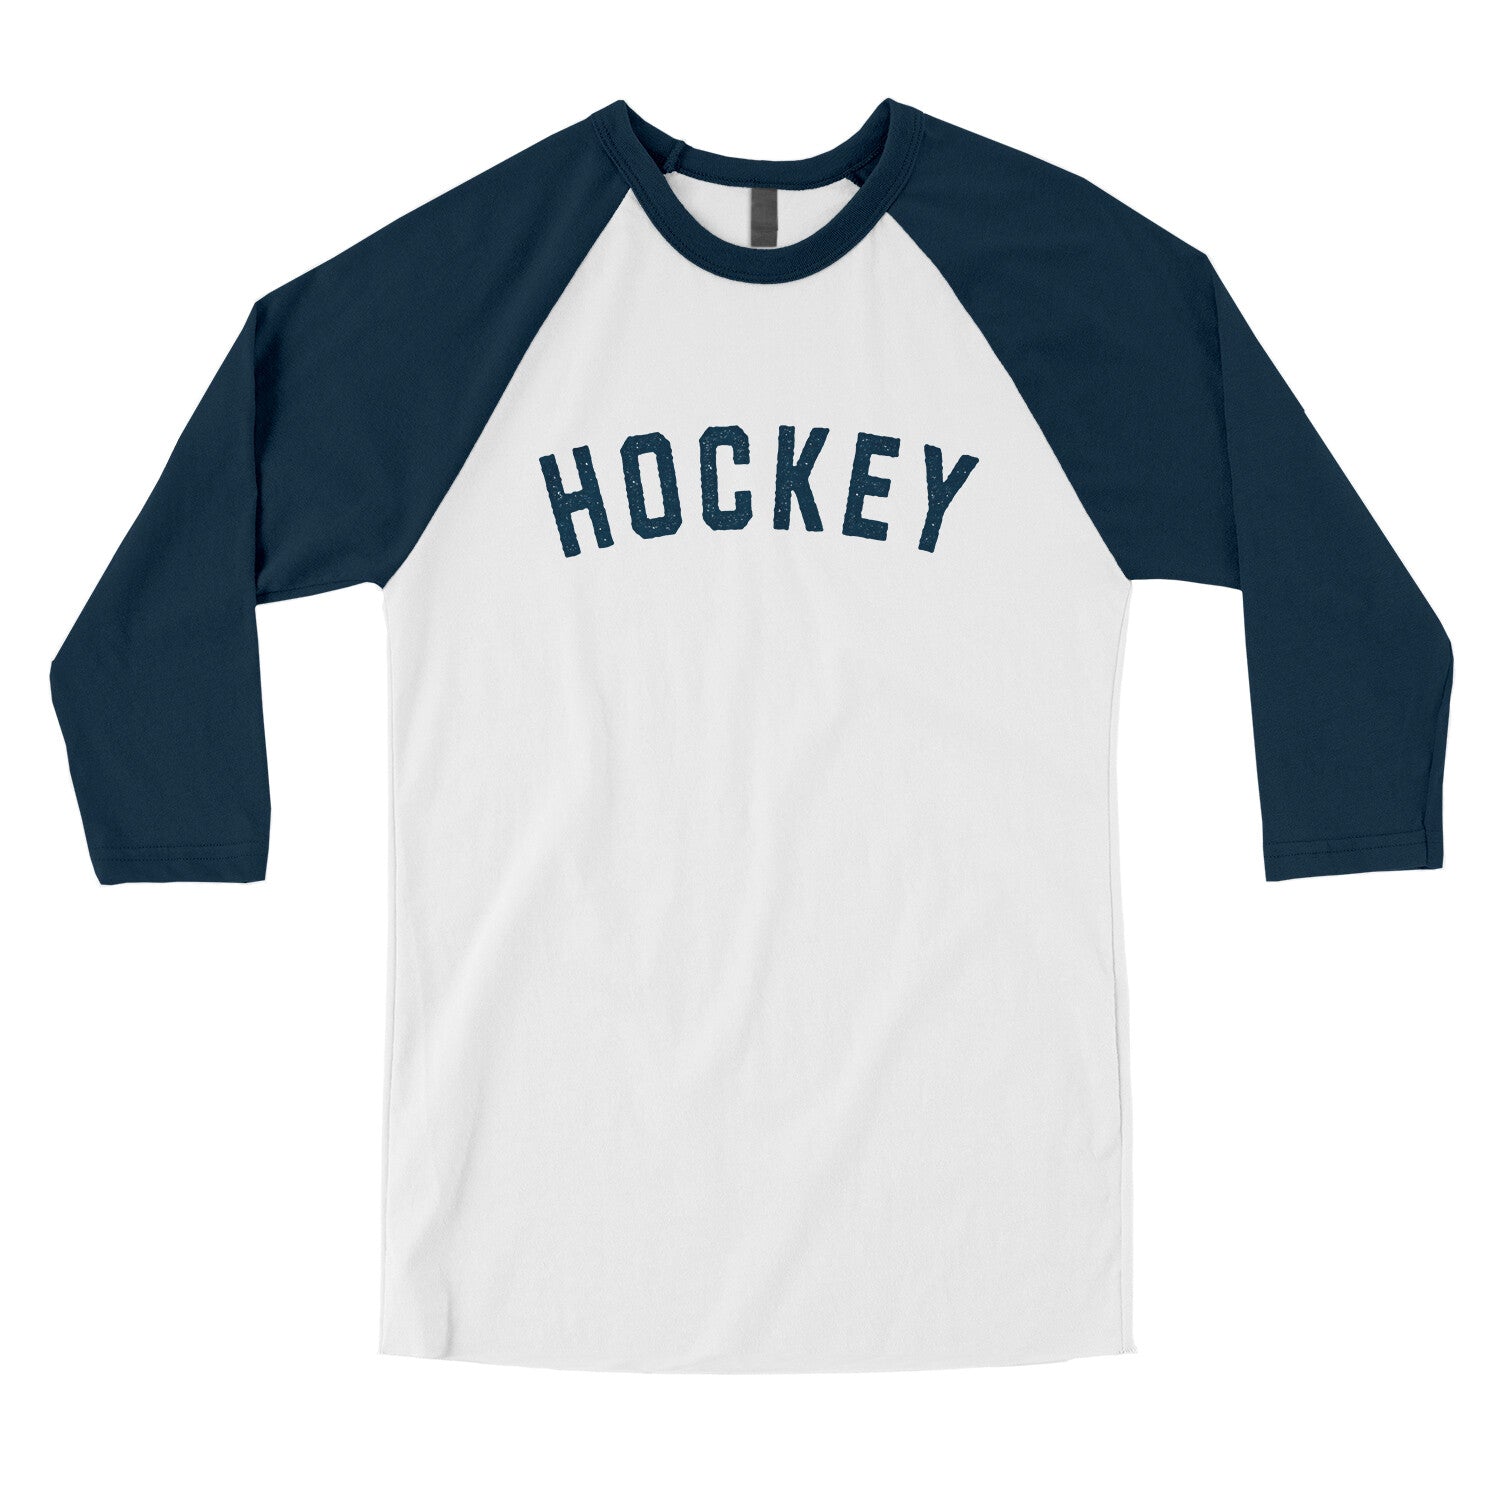 Hockey in White with Navy Color